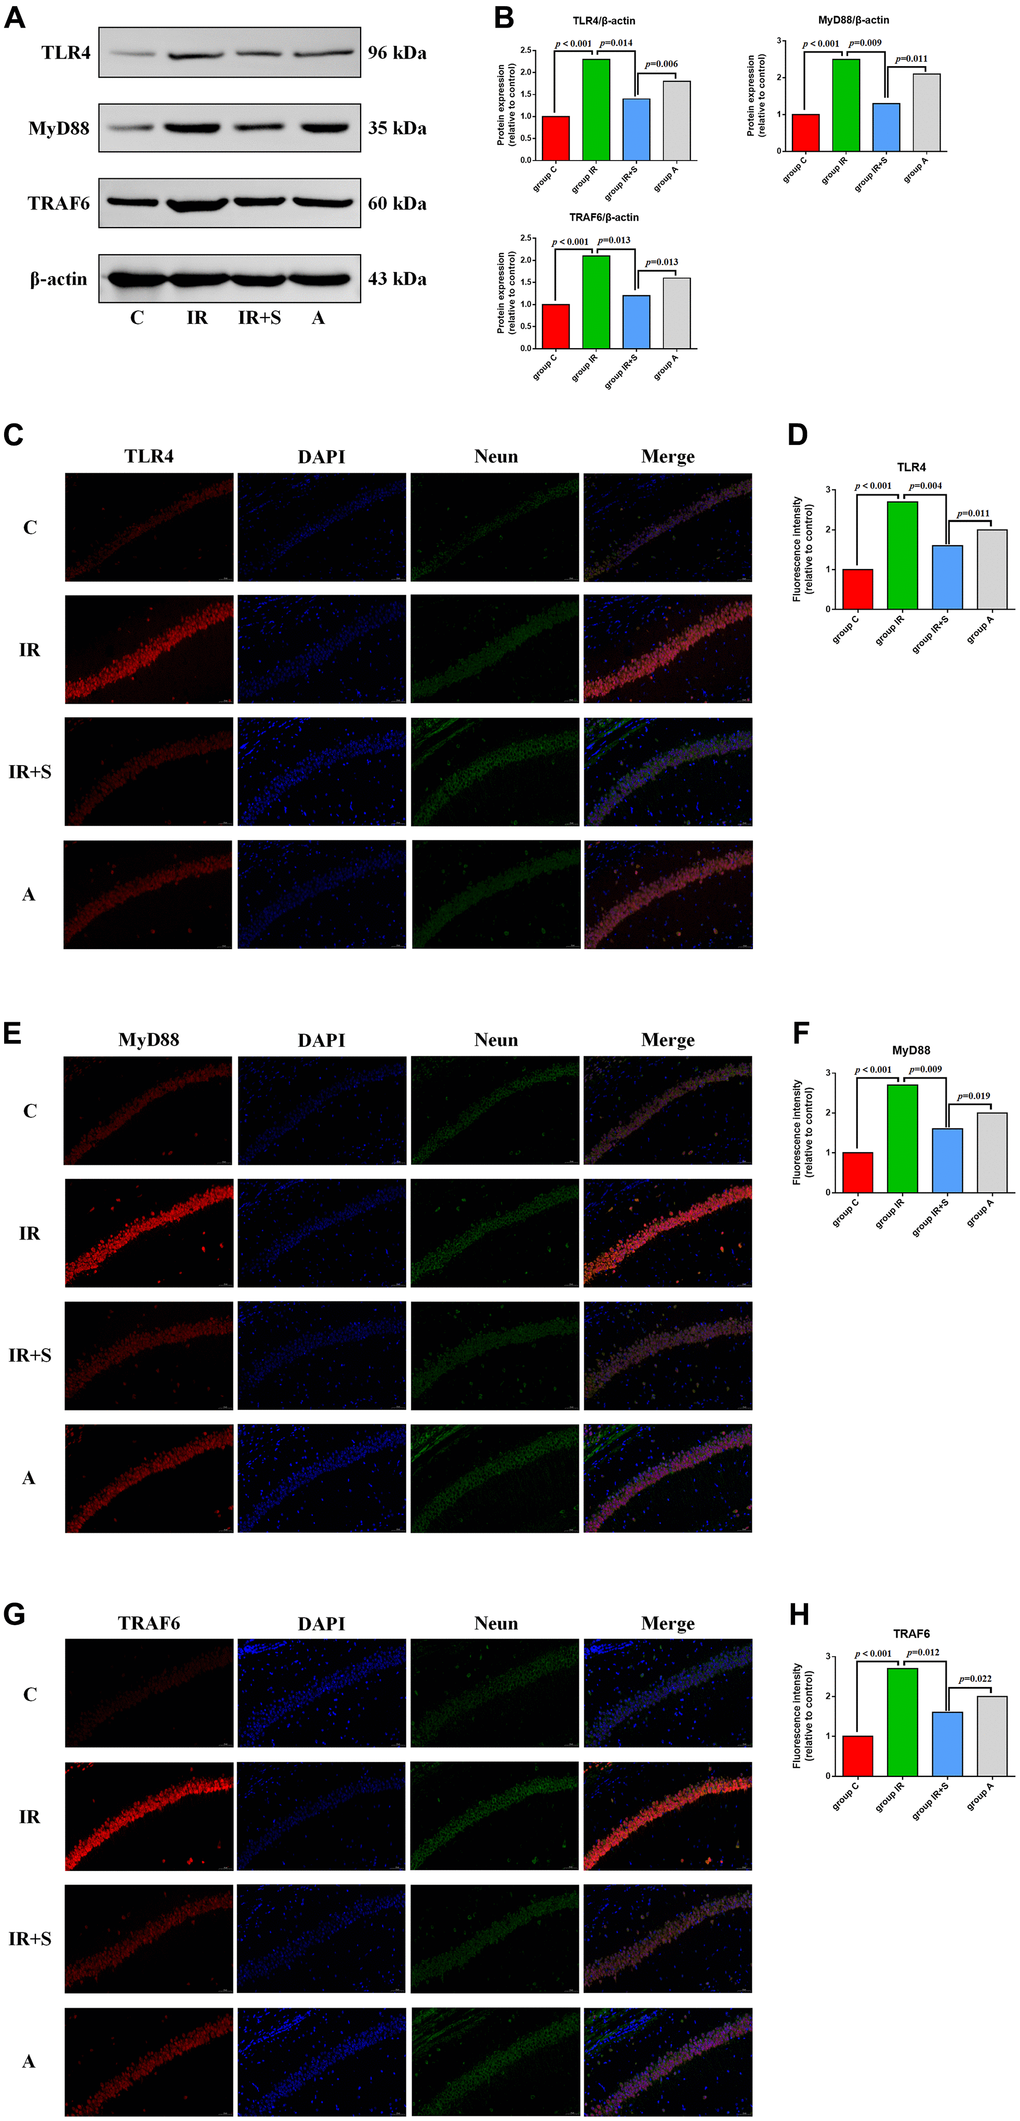 Sevoflurane postconditioning inhibits the TLR4/MyD88/TRAF6 signaling pathway to exert a neuroprotective effect in cerebral I/R rats. (A) Representative western blot of TLR4, MyD88, and TRAF6. (B) Representative photomicrographs of TLR4/DAPI staining (TLR4 in red and DAPI in blue), scale bar = 10 μm. (C) Representative photomicrographs of MyD88/DAPI staining (MyD88 in red and DAPI in blue), scale bar = 10 μm. (D) Representative photomicrographs of TRAF6/DAPI staining (TRAF6 in red and DAPI in blue), scale bar = 10 μm. (E) Percentages of TLR4/DAPI-positive cells. (F) Percentages of MyD88/DAPI-positive cells. (G) Percentages of TRAF6/DAPI-positive cells. (H) Percentages of TRAF6/DAPI-positive cells.